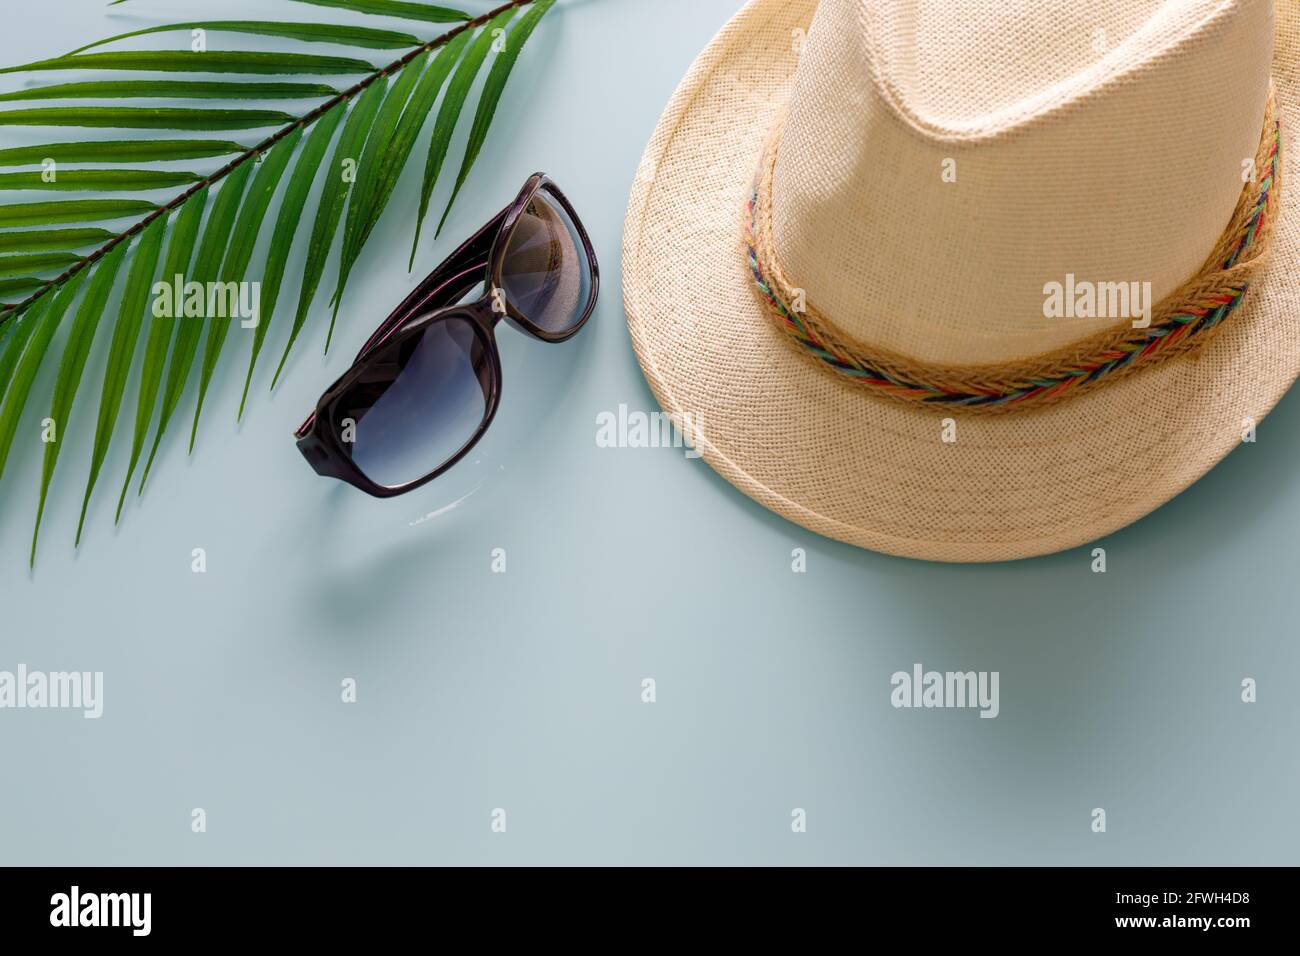 Alamy Page stock hi-res Borsalino - and - 2 photography hat images